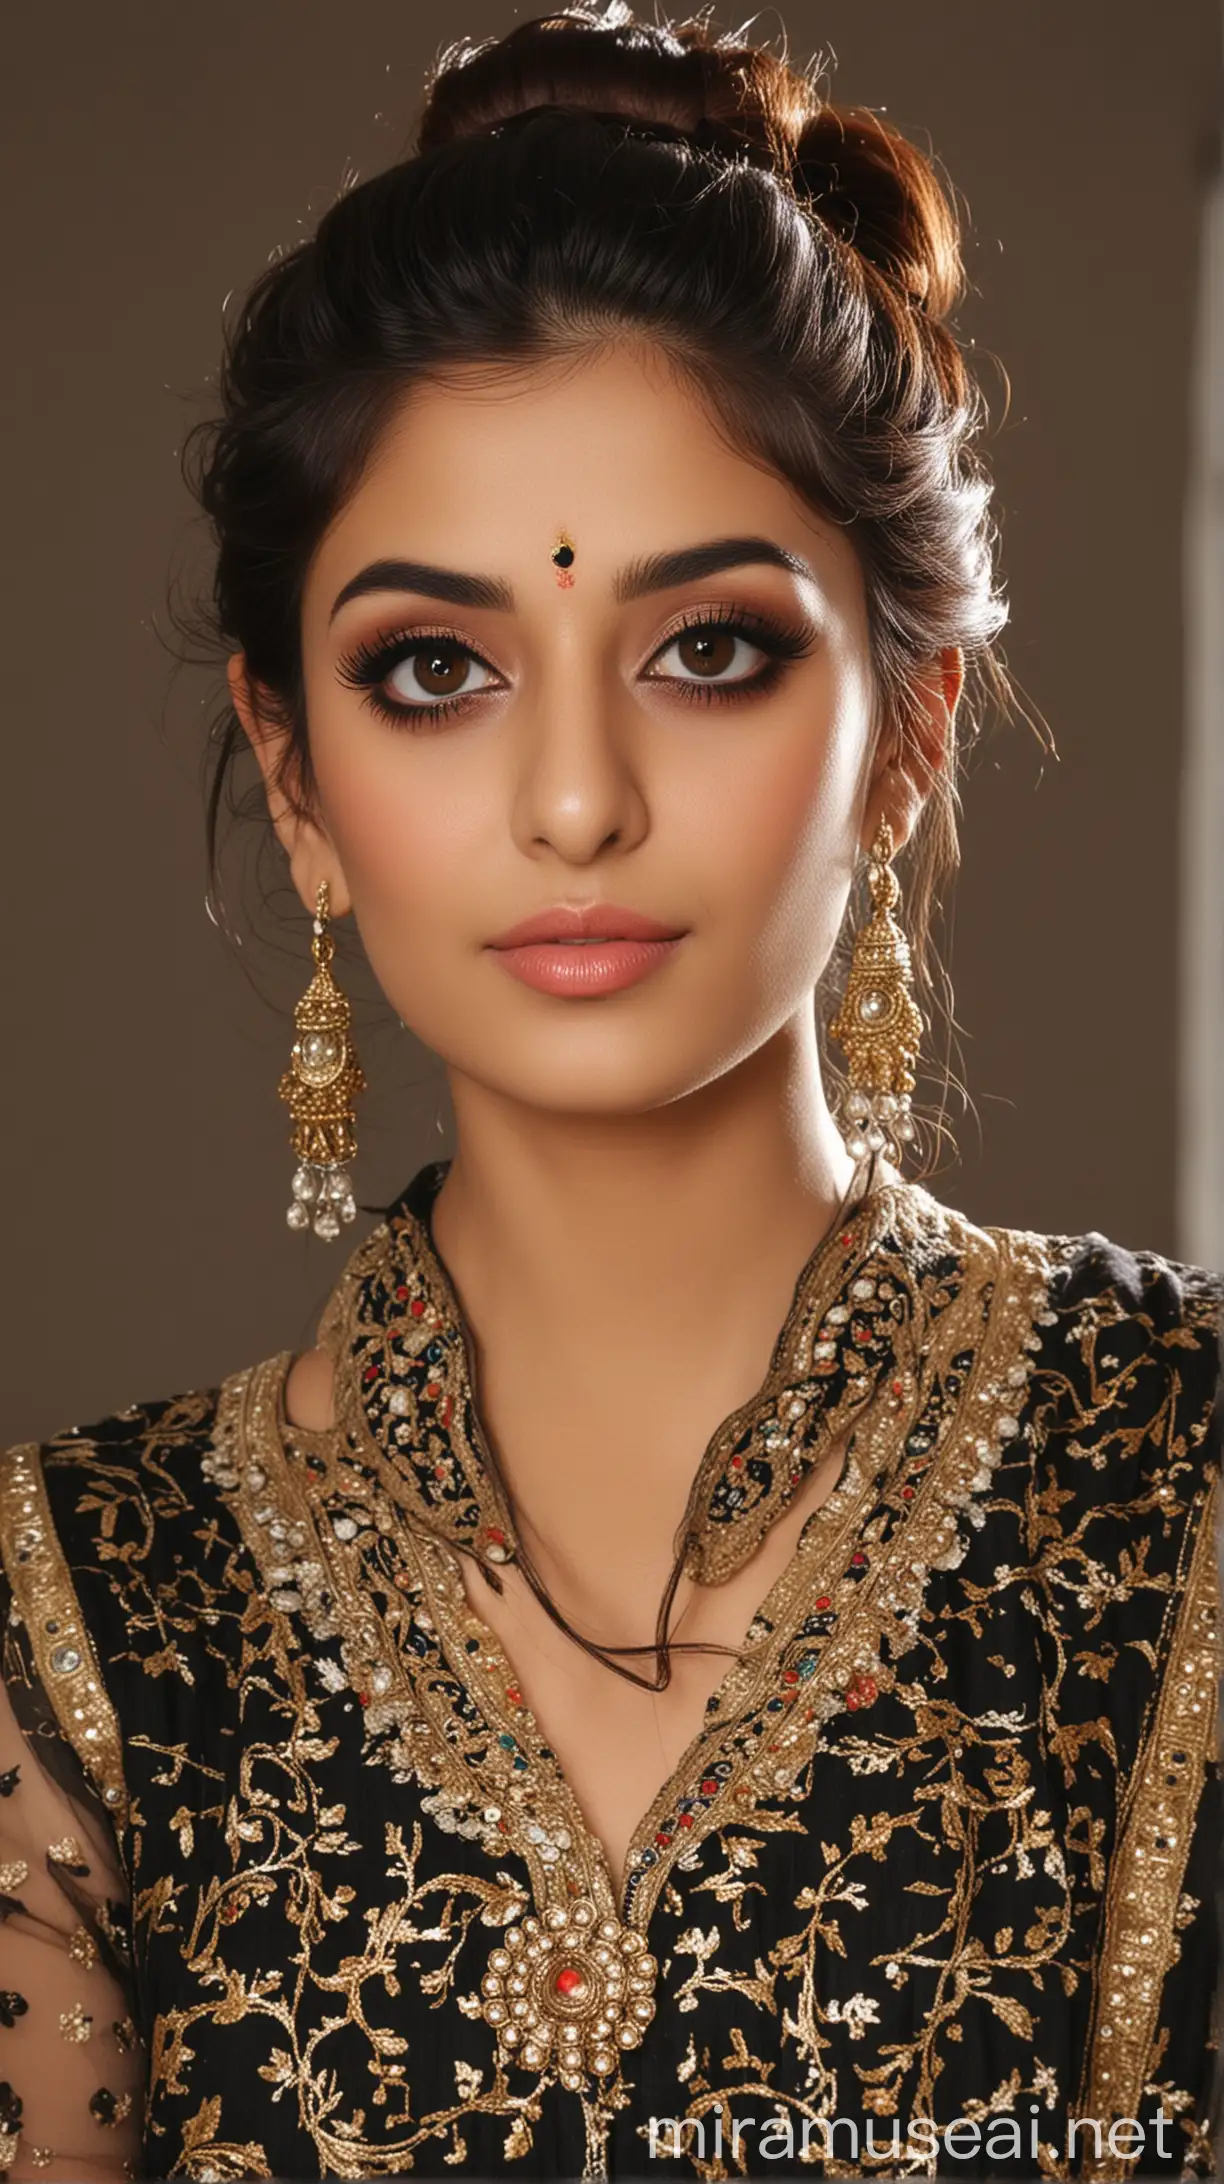 Pakistani women,,cute,,extreme attractive,,extreme beautiful,,Indian makeup,,bun messy hair style,,extra wide photo,,unique blouse 